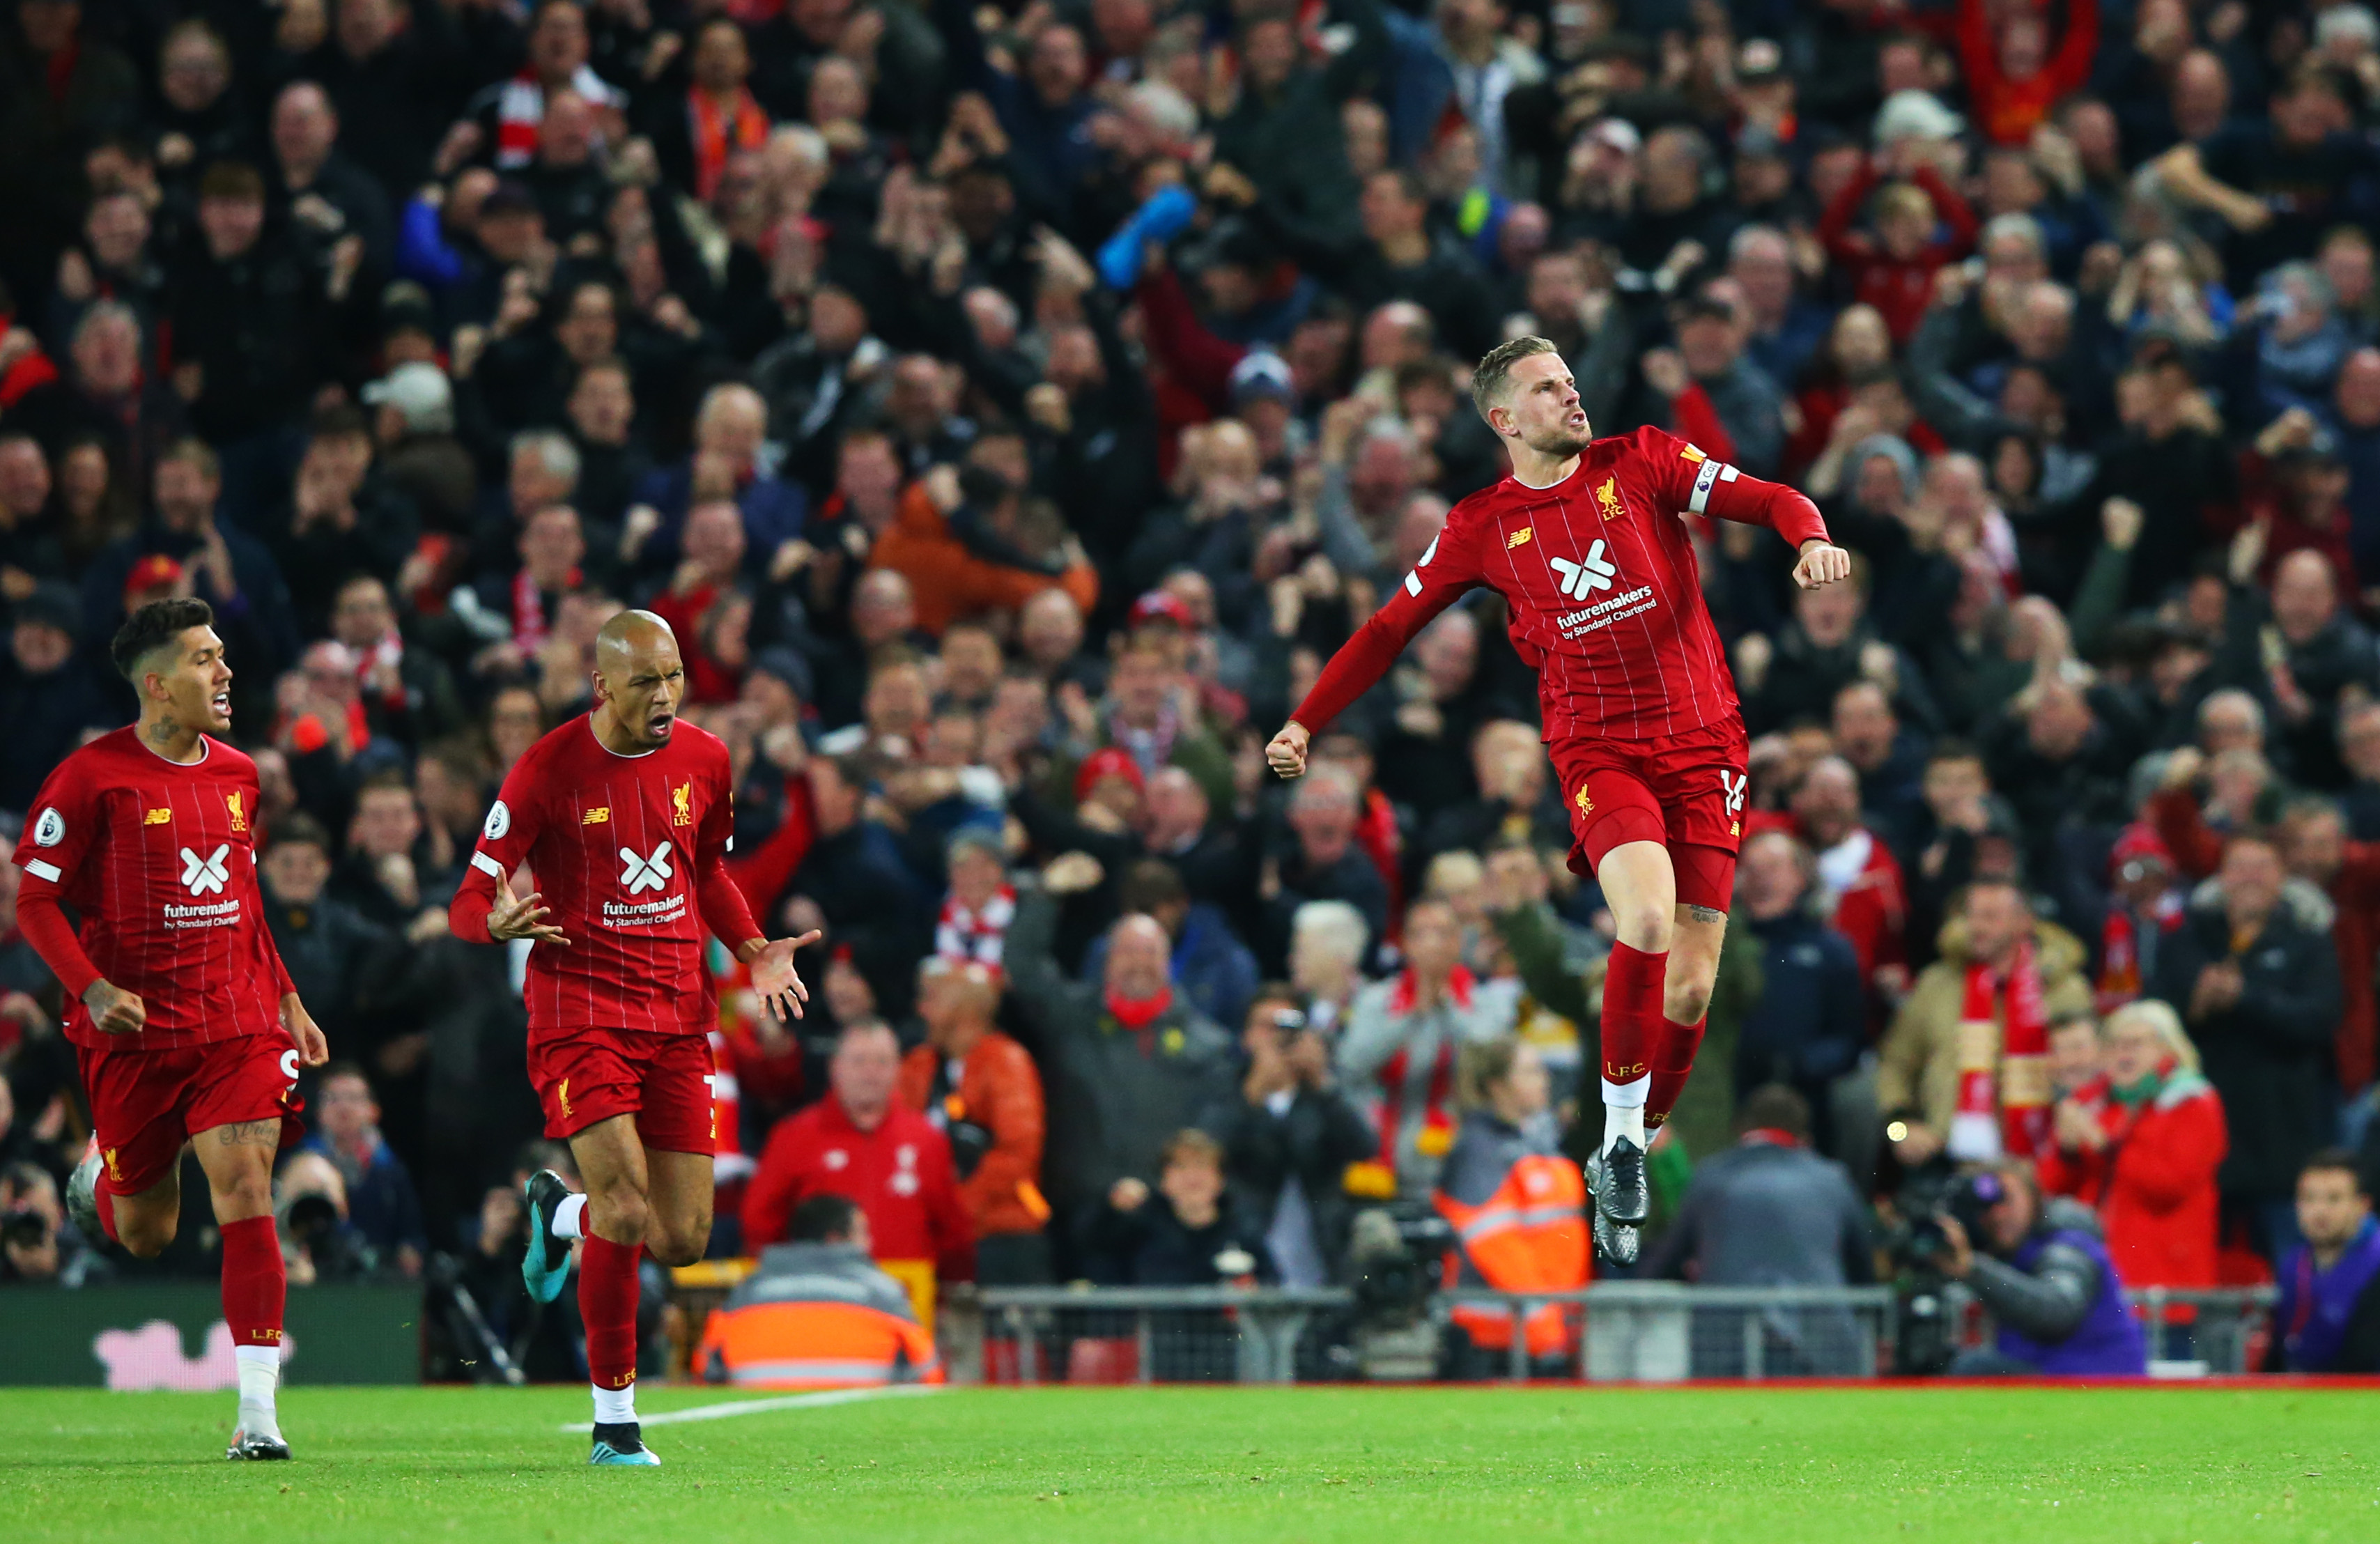 LIVERPOOL, ENGLAND - OCTOBER 27:  Jordan Henderson of Liverpool celebrates after scoring his team's first goal during the Premier League match between Liverpool FC and Tottenham Hotspur at Anfield on October 27, 2019 in Liverpool, United Kingdom. (Photo by Alex Livesey/Getty Images)